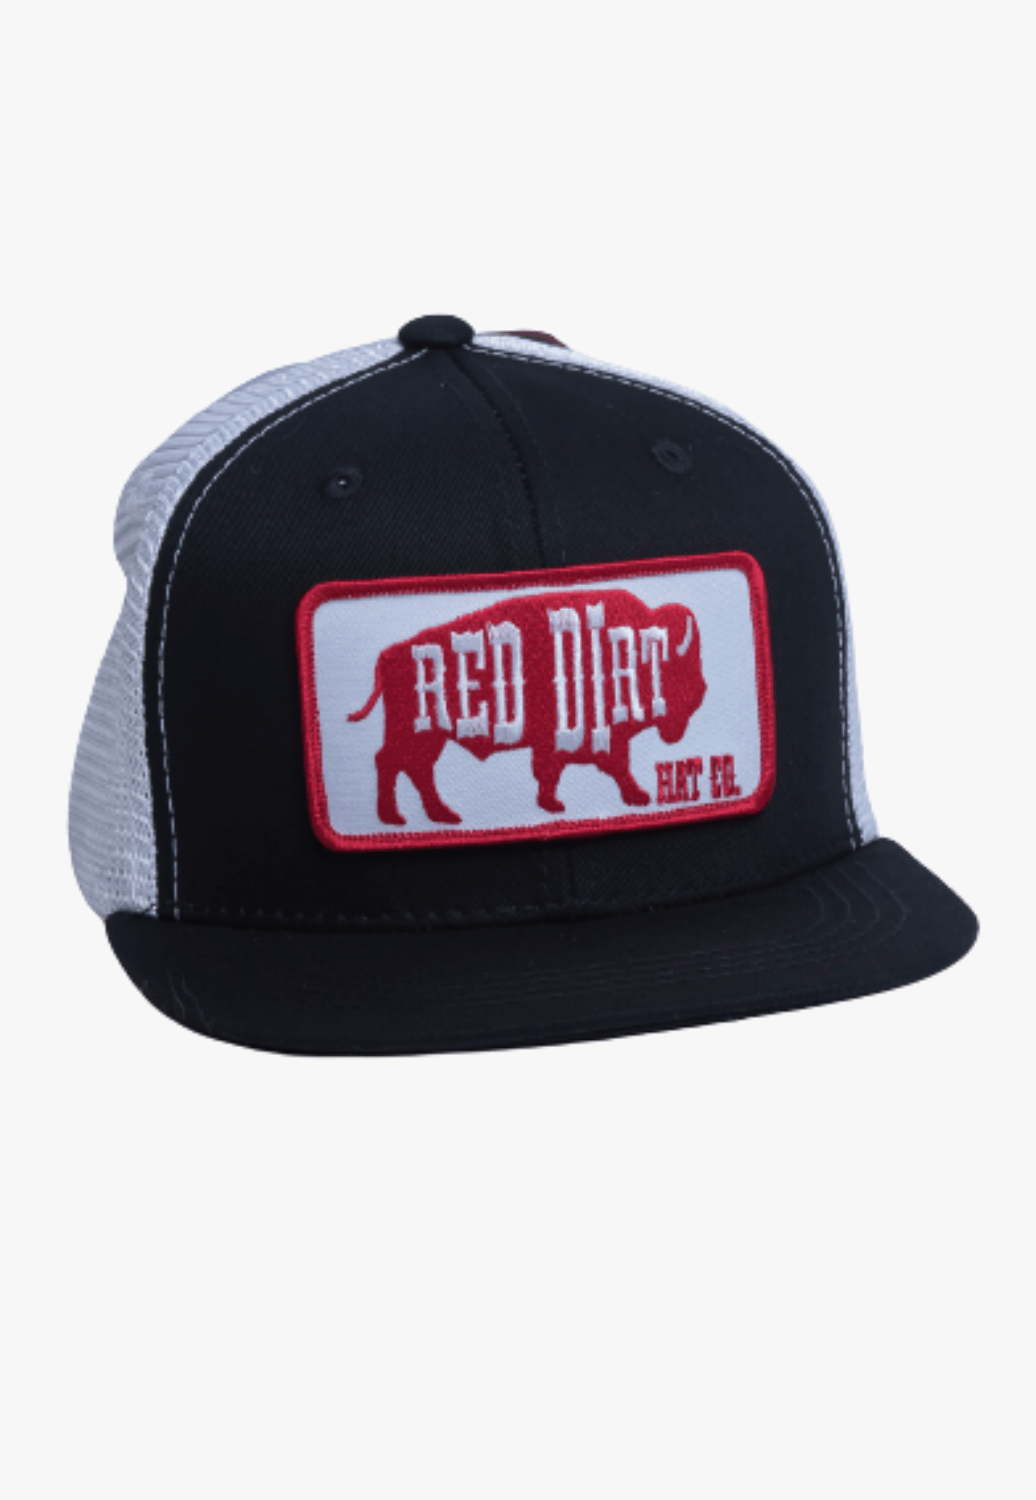 Red Dirt Hat Co. HATS - Caps Black/White Red Dirt Hat Co. Red Original Cap